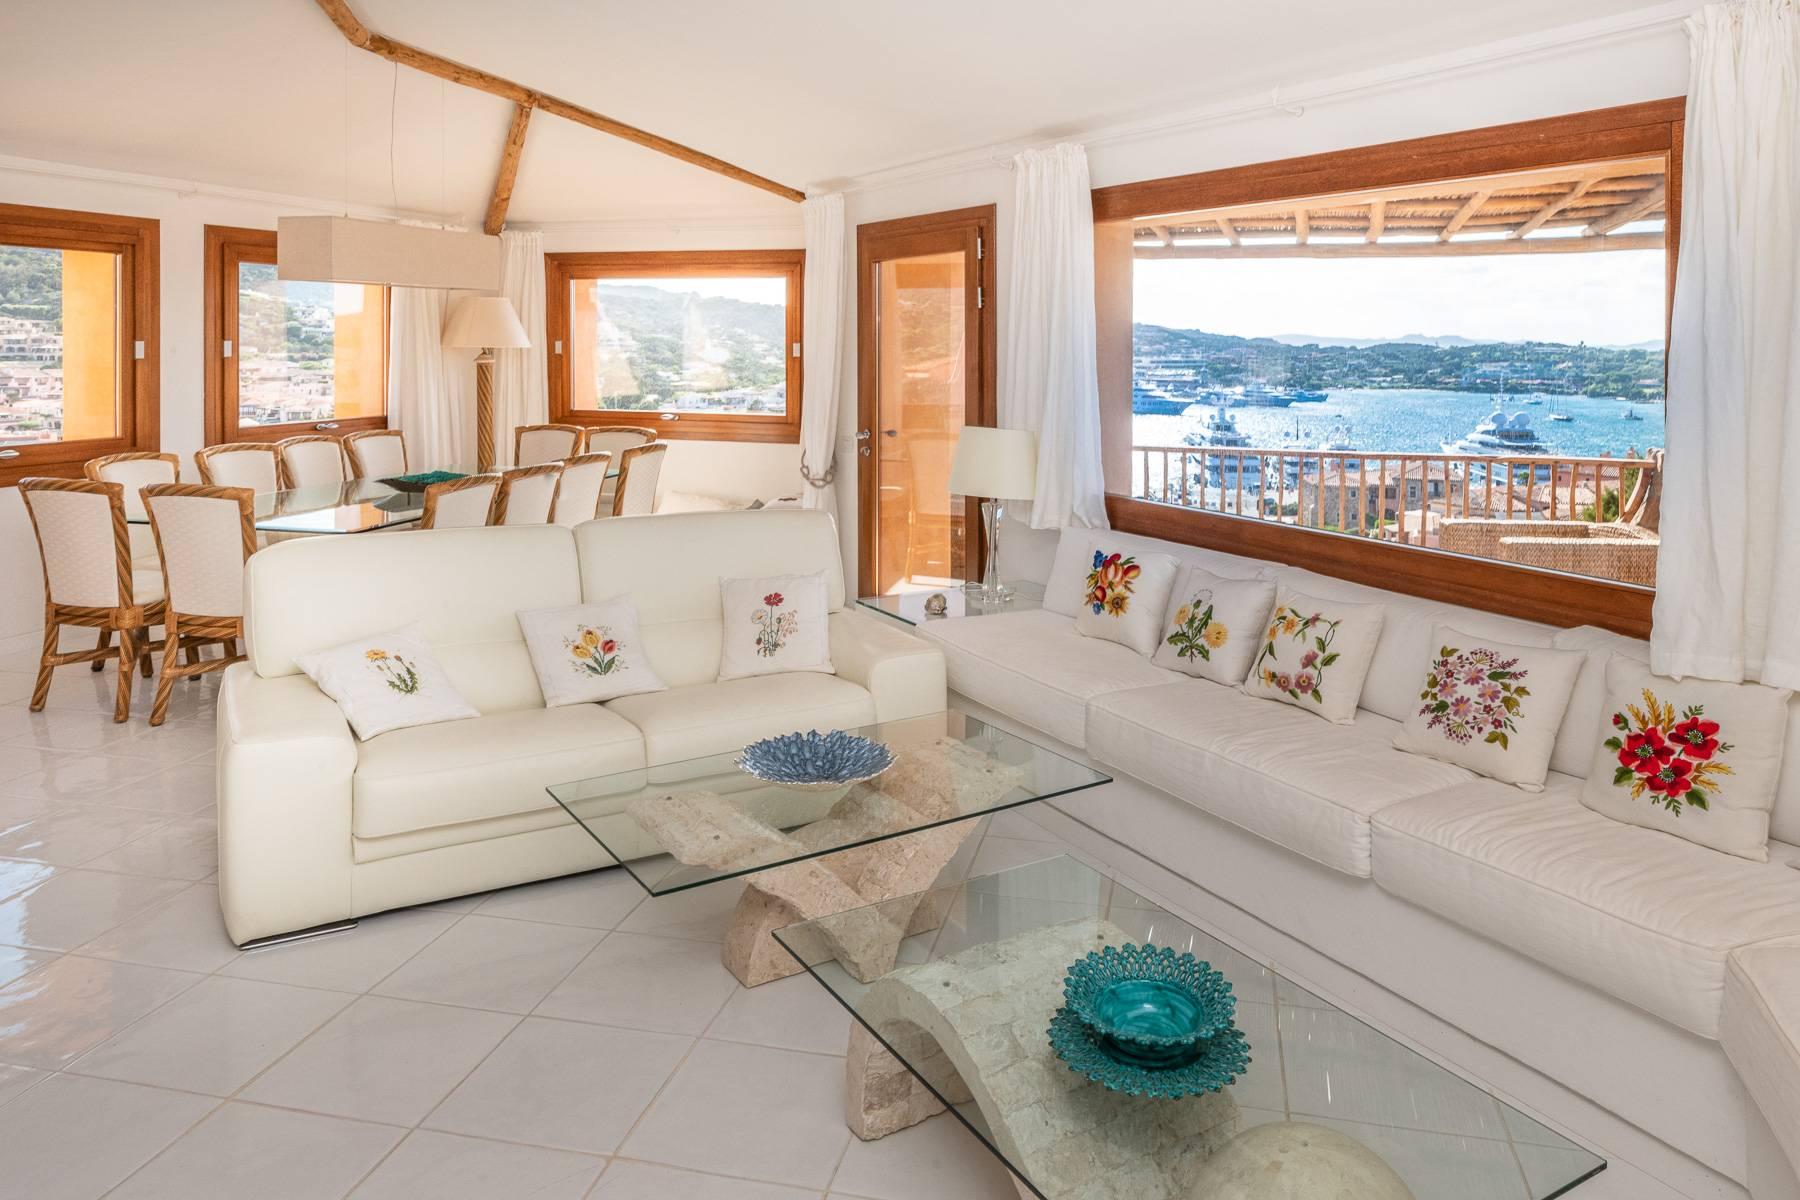 Important independent villa with beautiful panoramic views of the bay and marina of Porto Cervo. - 4